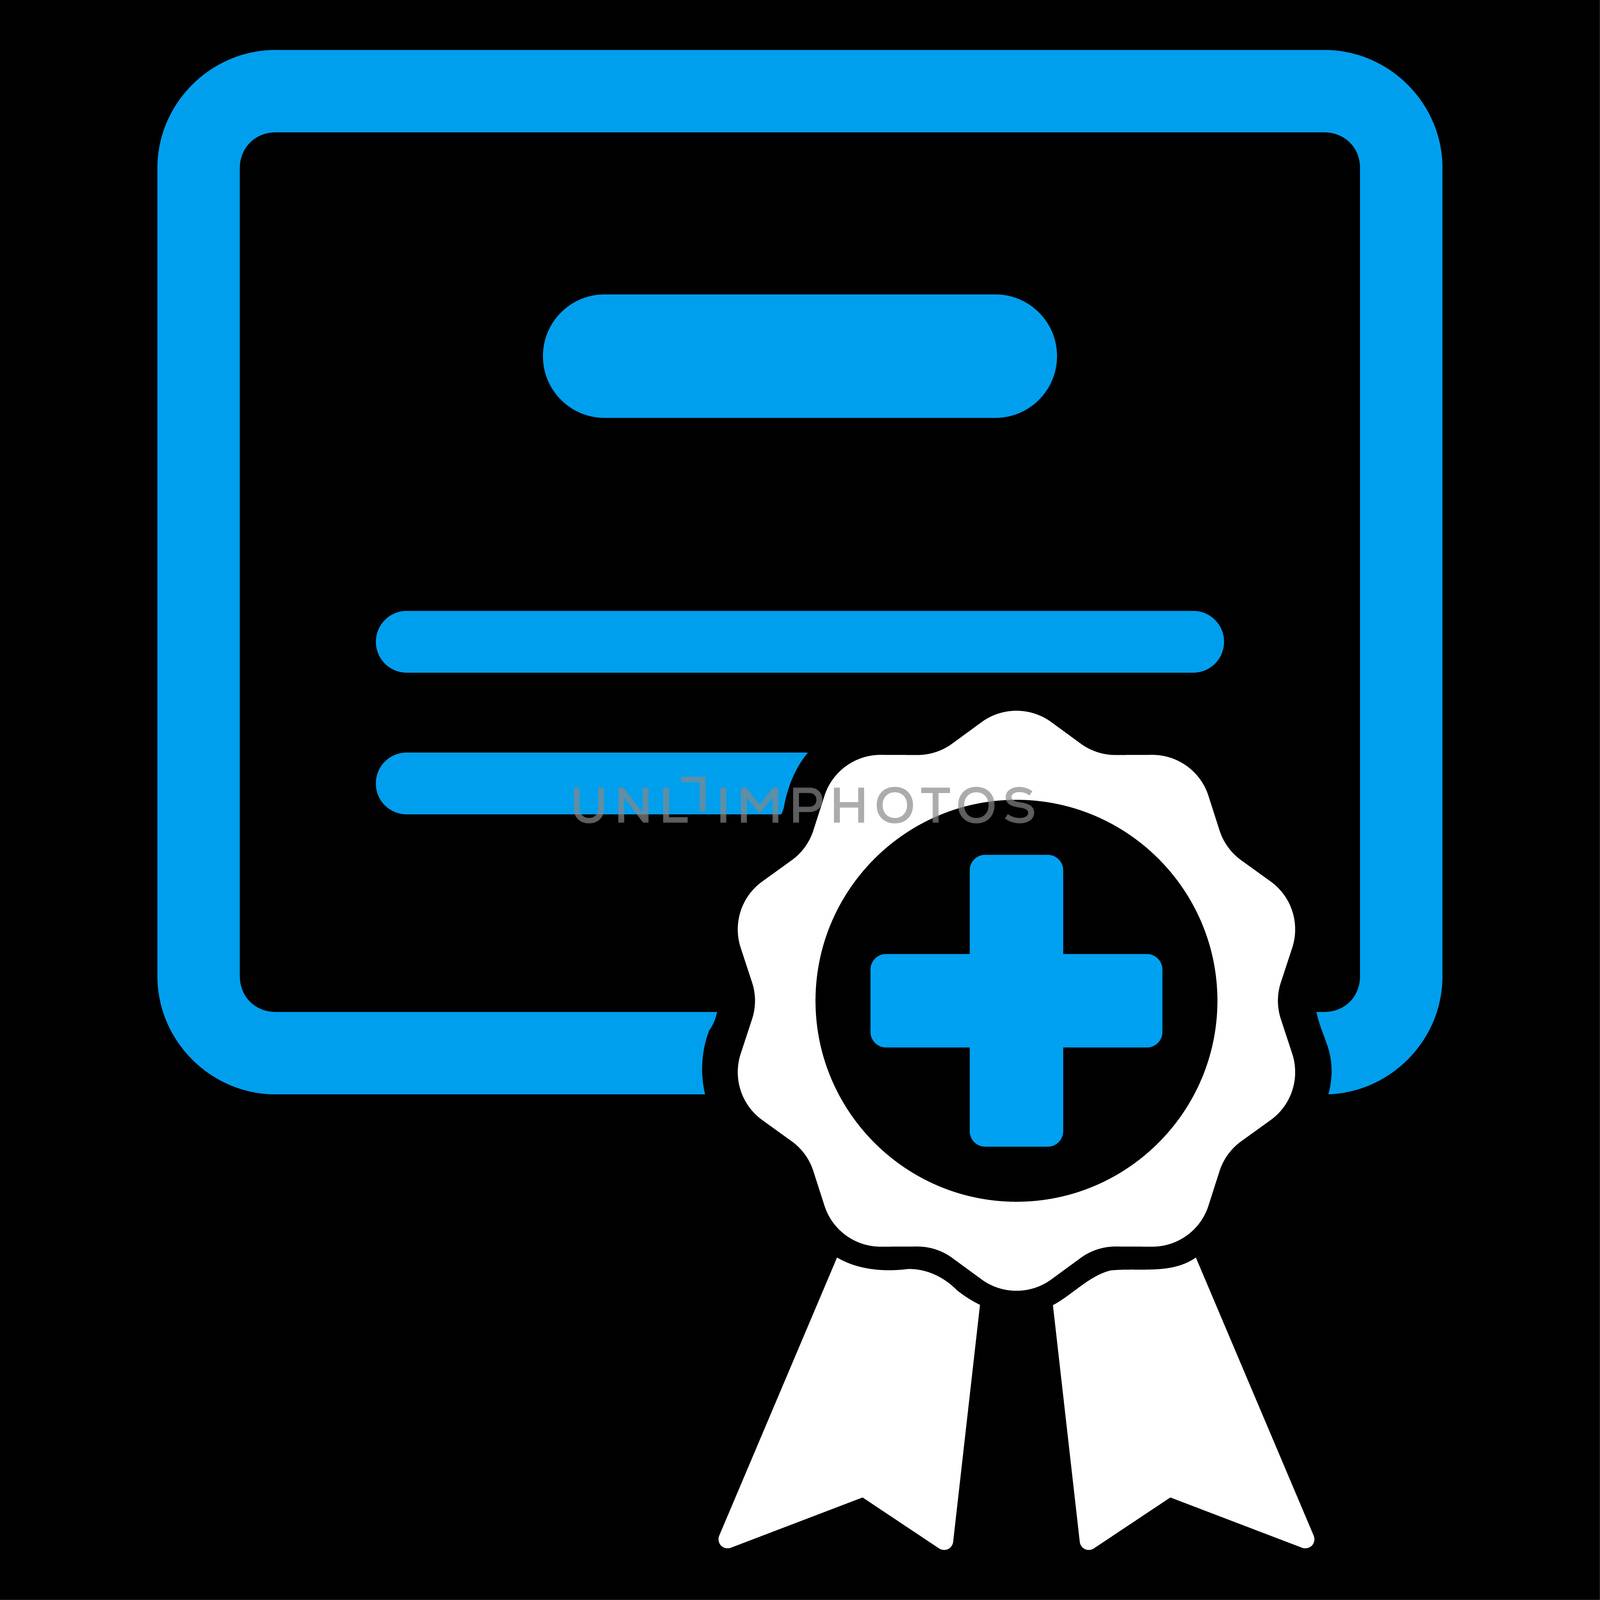 Certification raster icon. Style is bicolor flat symbol, blue and white colors, rounded angles, black background.